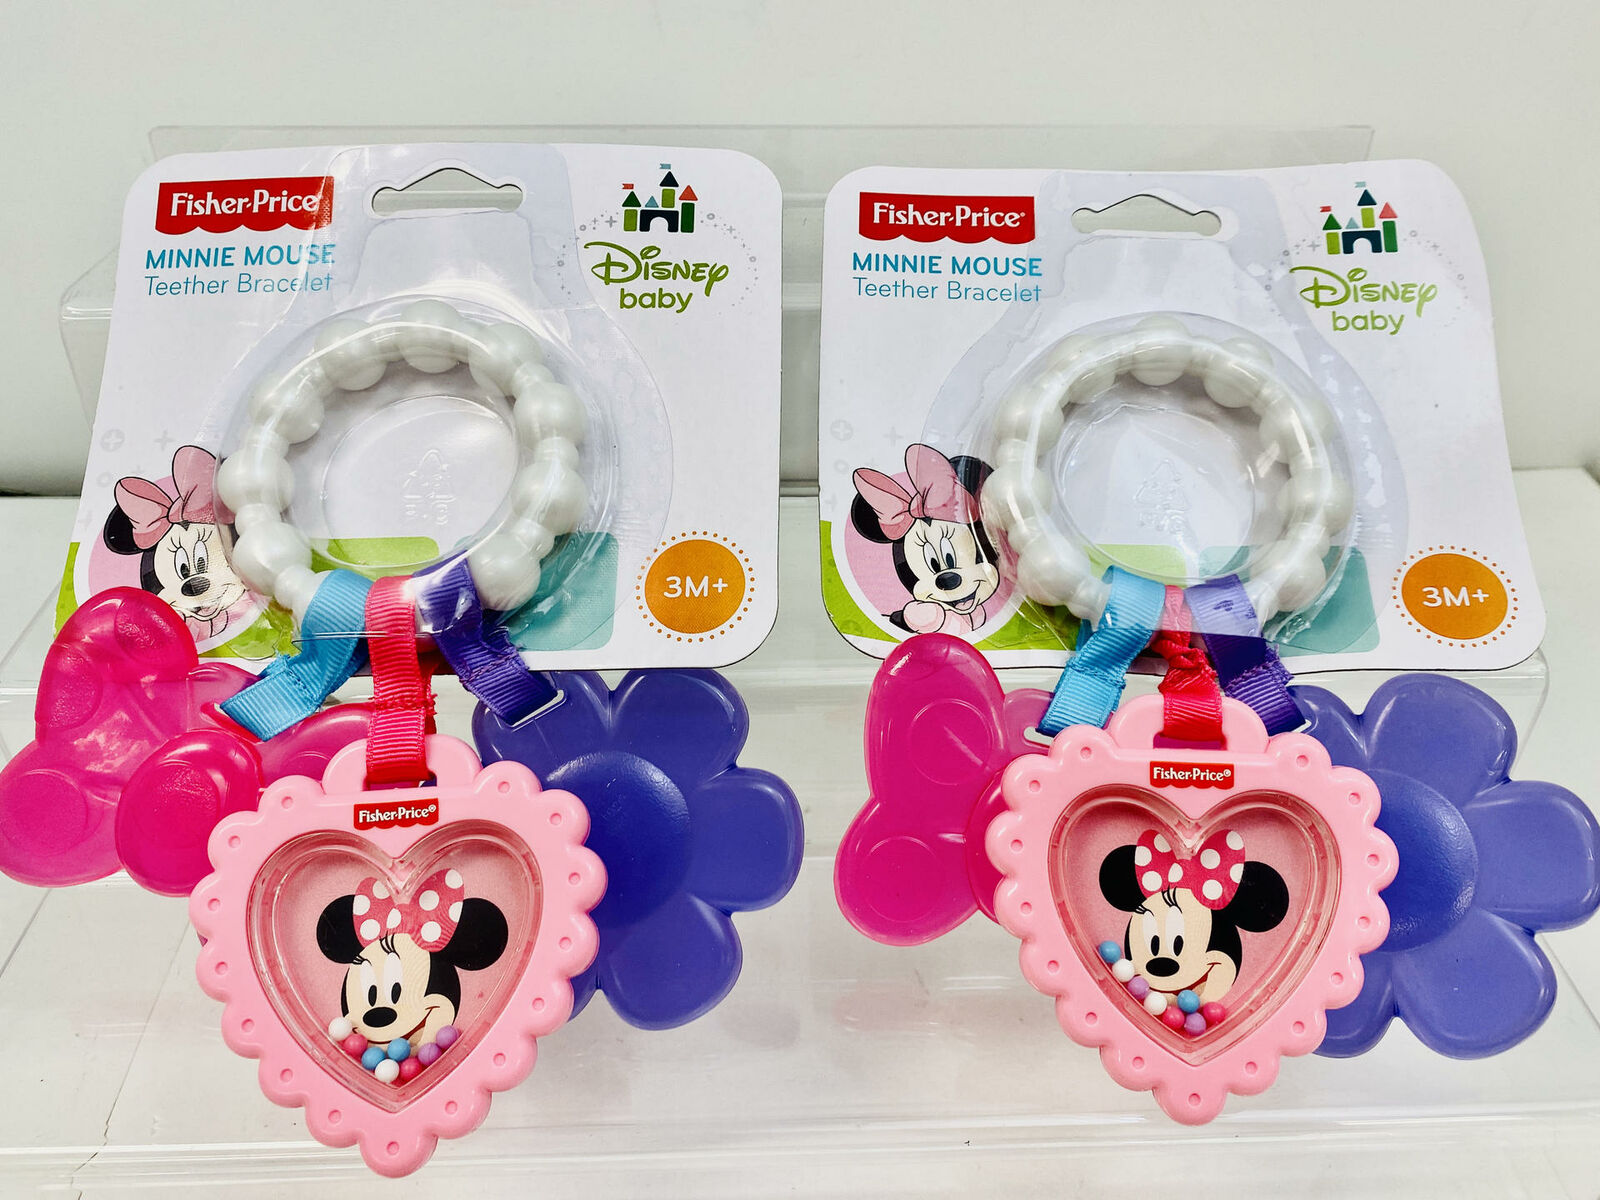 2-Pack of Fisher-Price Minnie Mouse Teether Charm Bracelet w/ Built-in Rattle